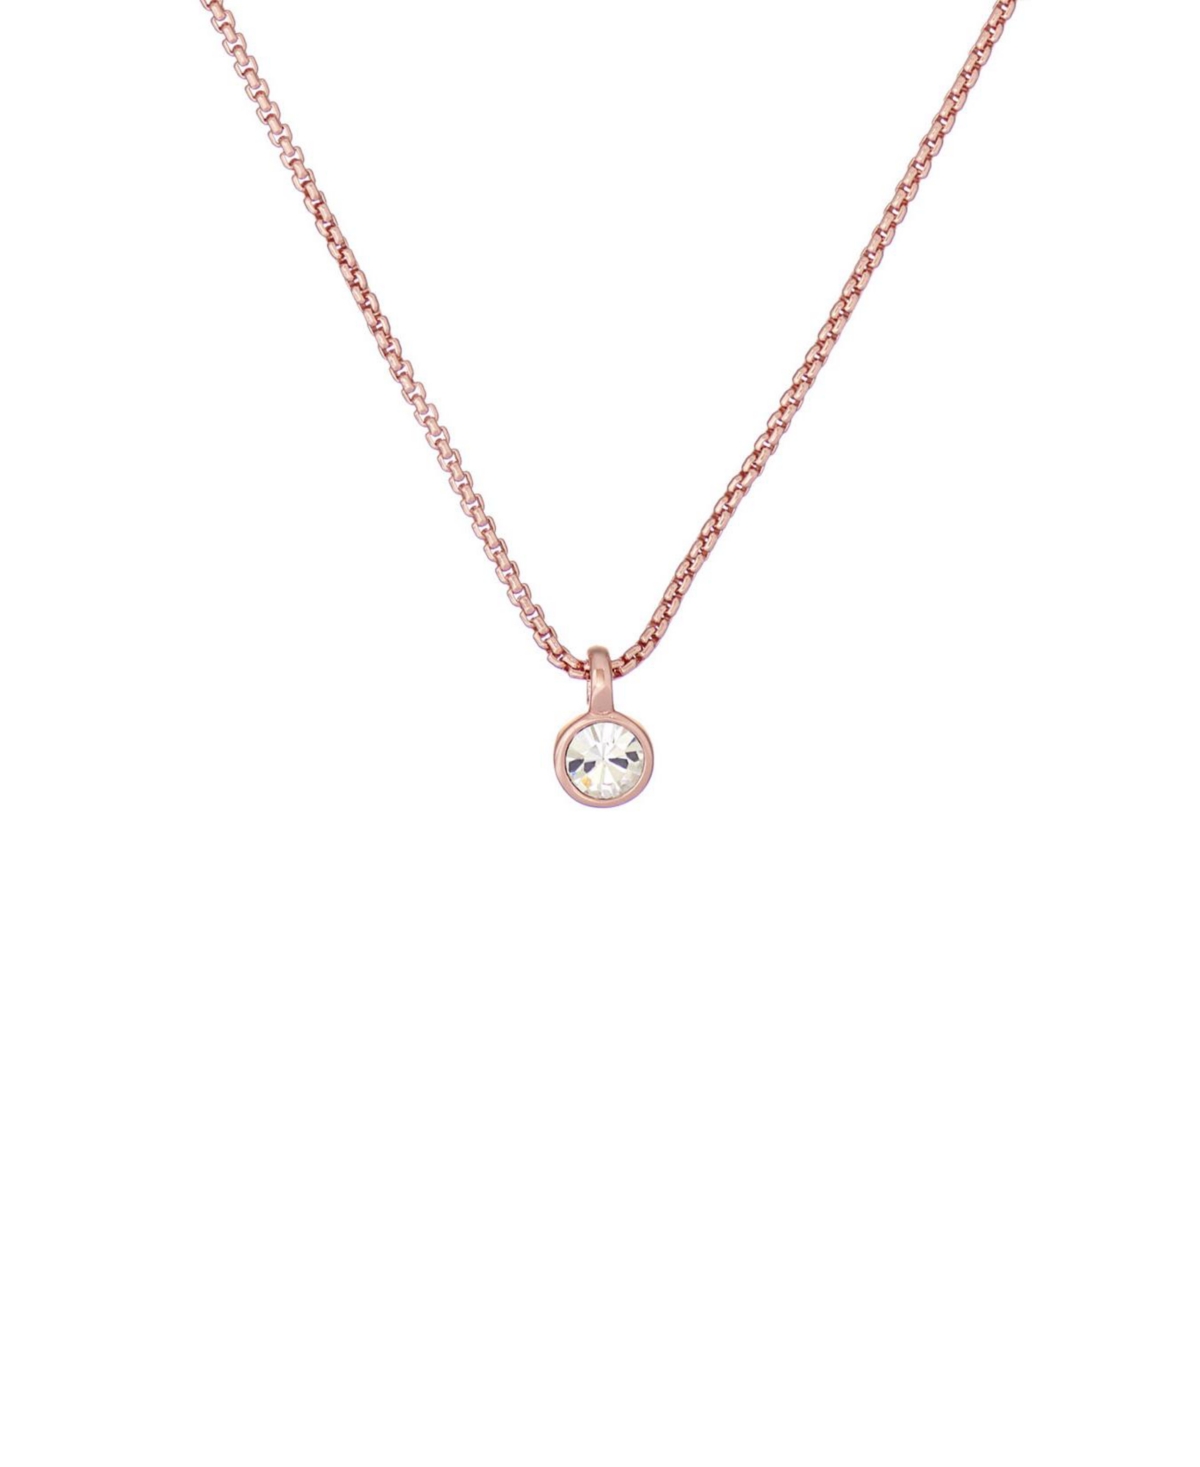 Sininaa: Crystal Pendant Necklace For Women - Rose gold